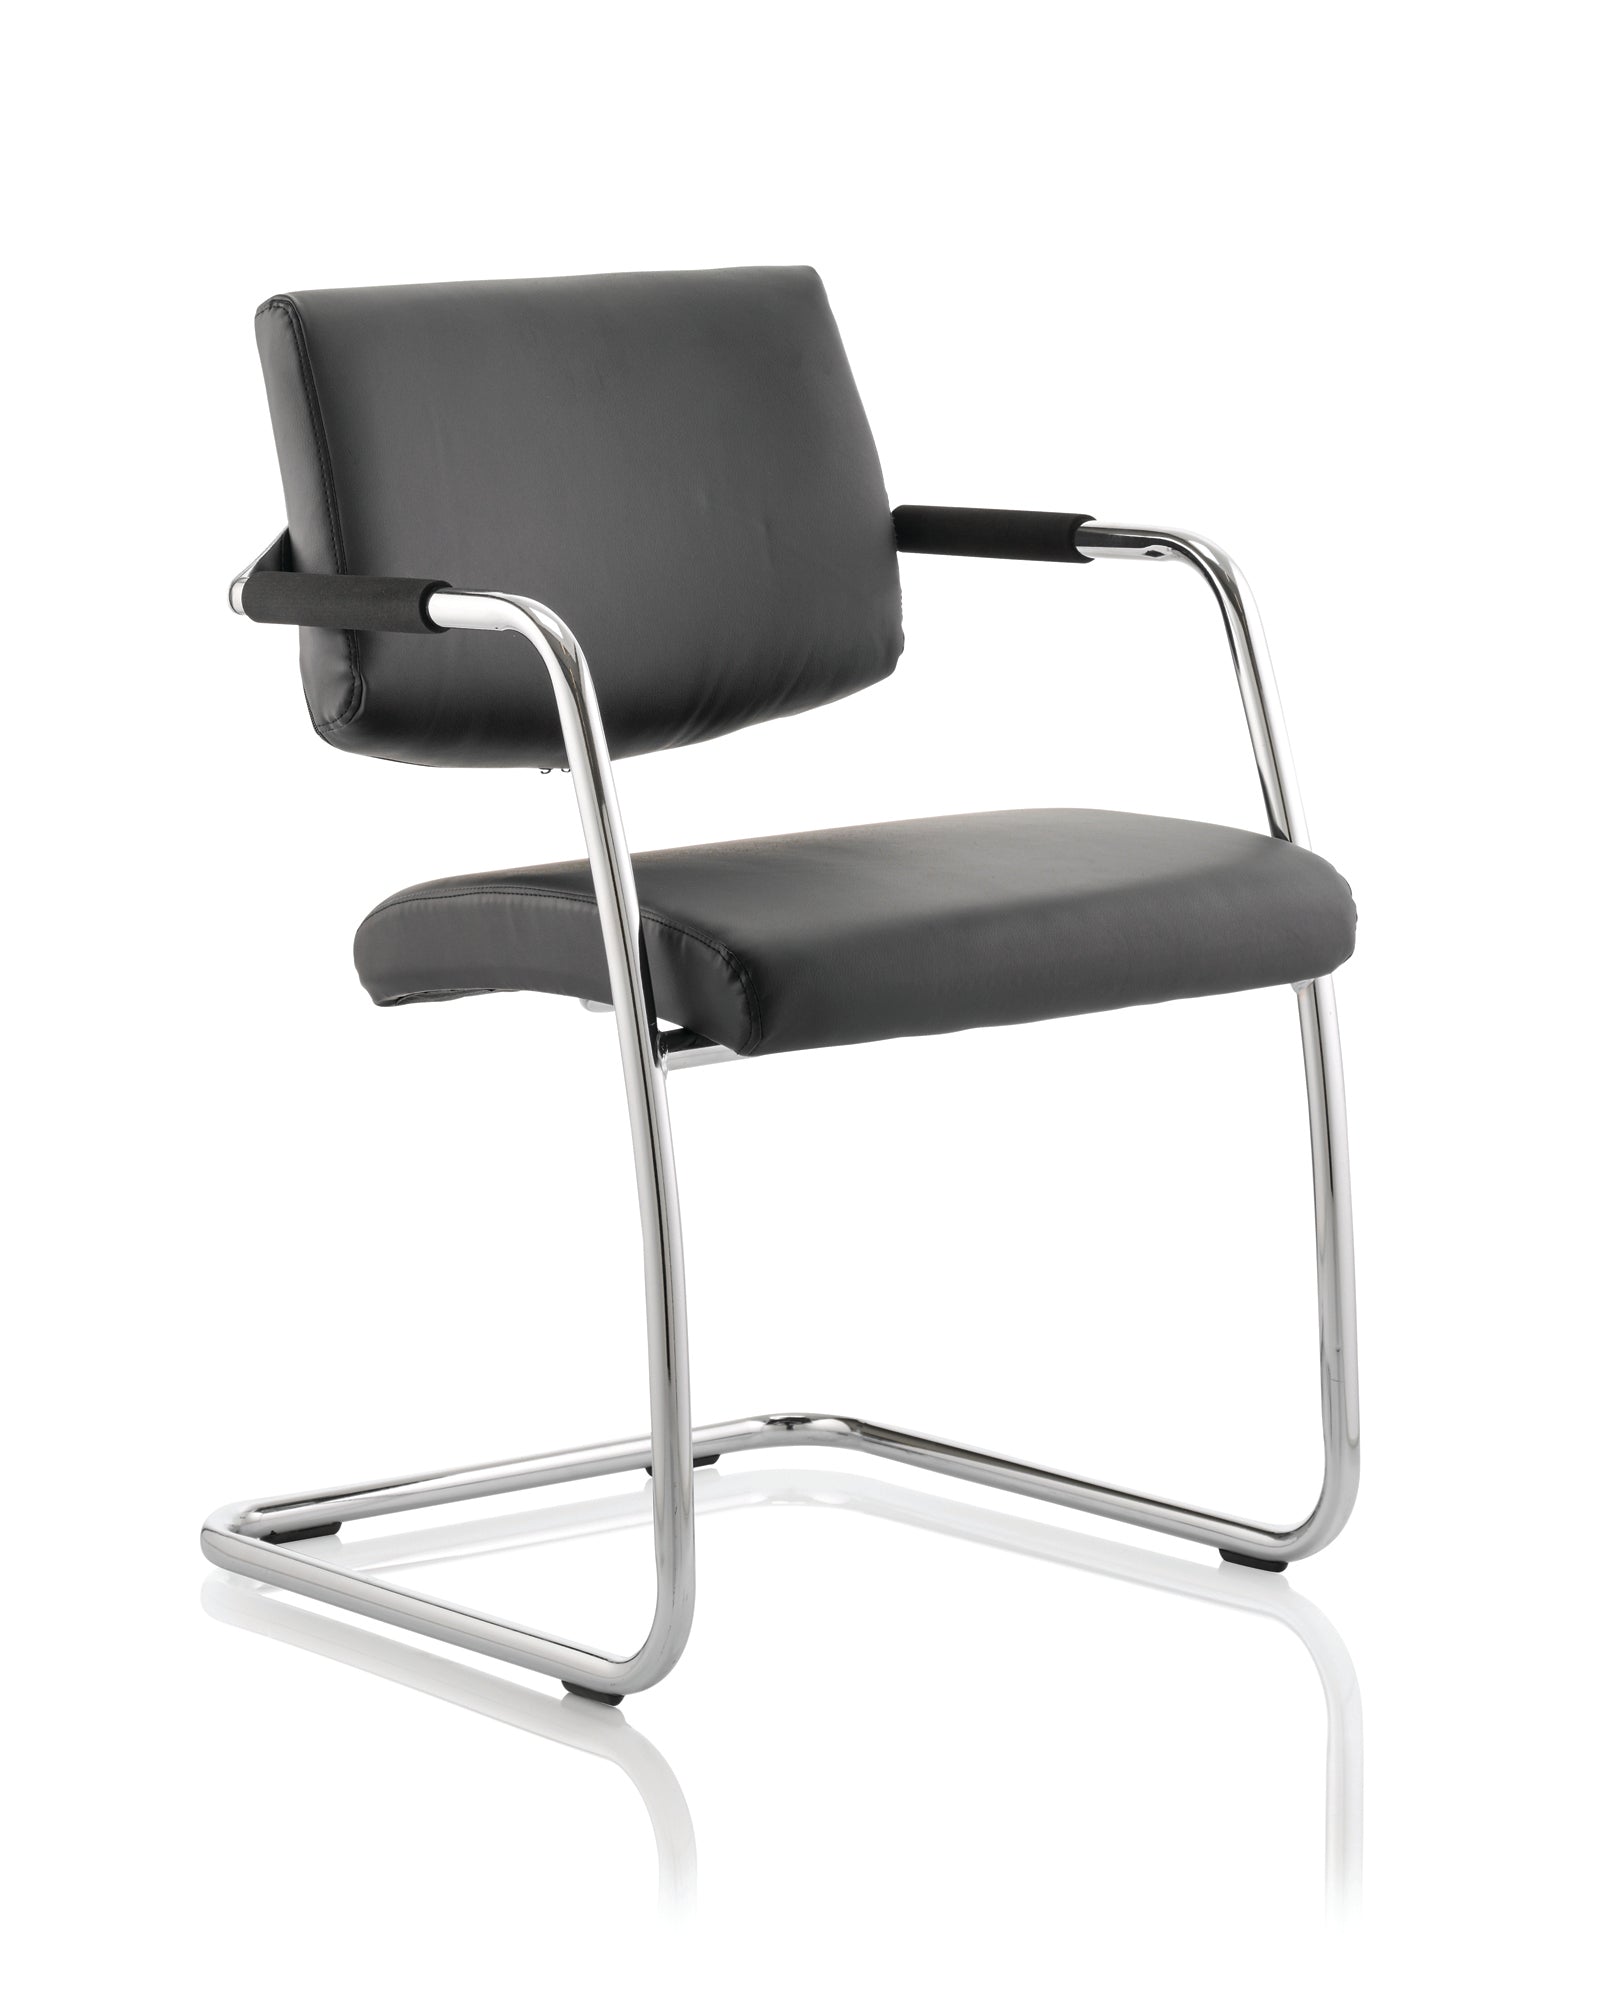 Havanna Medium Back Cantilever Visitor Chair with Arms